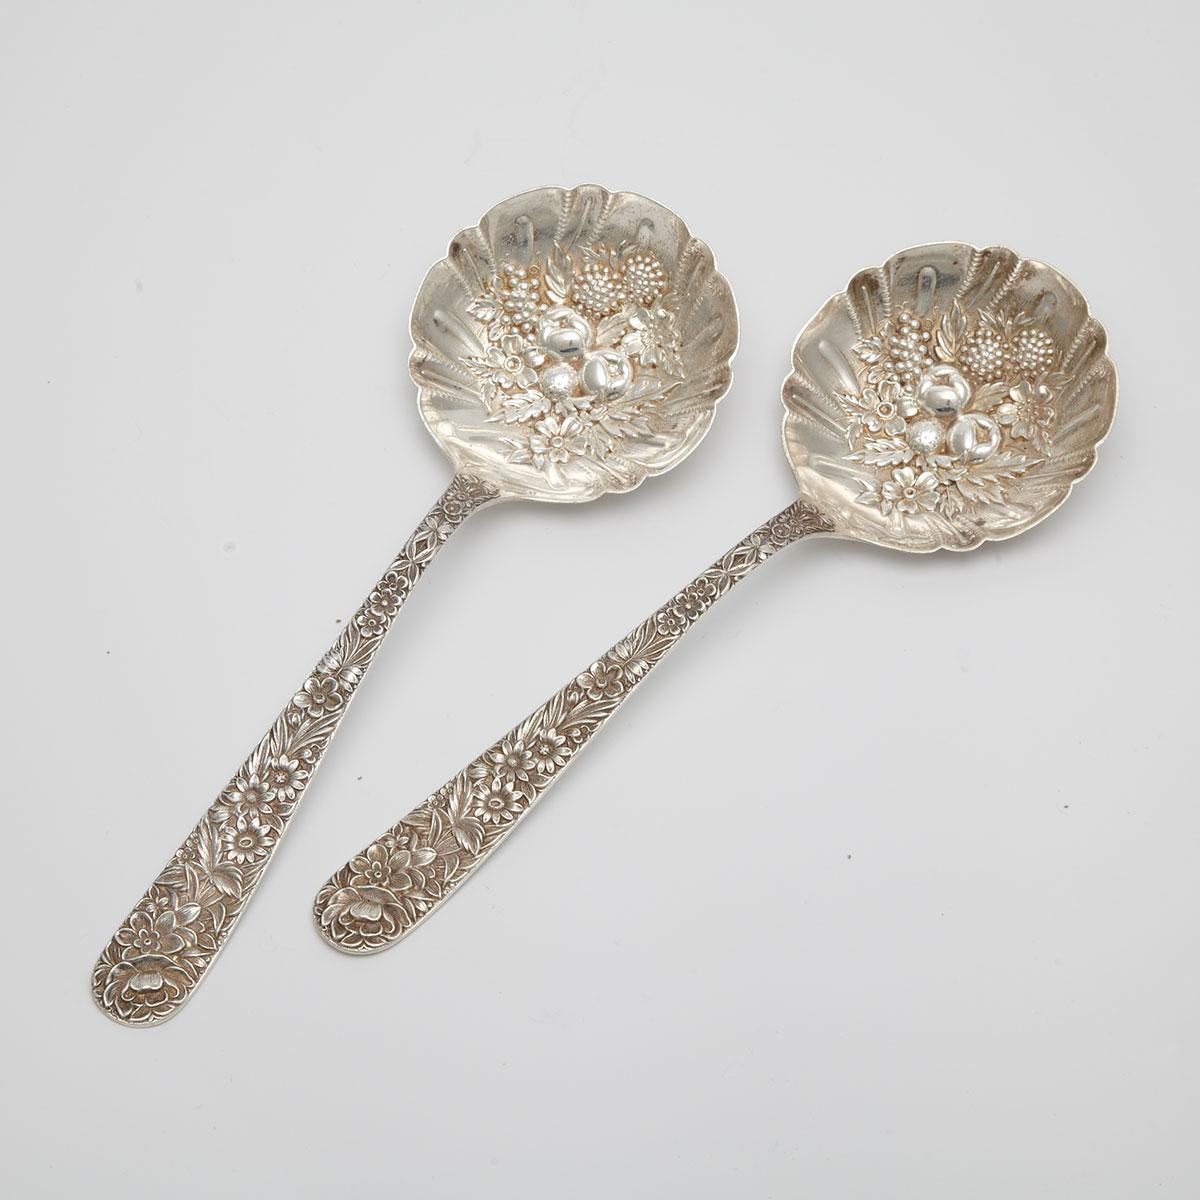 Pair of American Silver ‘Repousse’ Pattern Berry Spoons, Samuel Kirk & Son, Baltimore, Md., c.1900